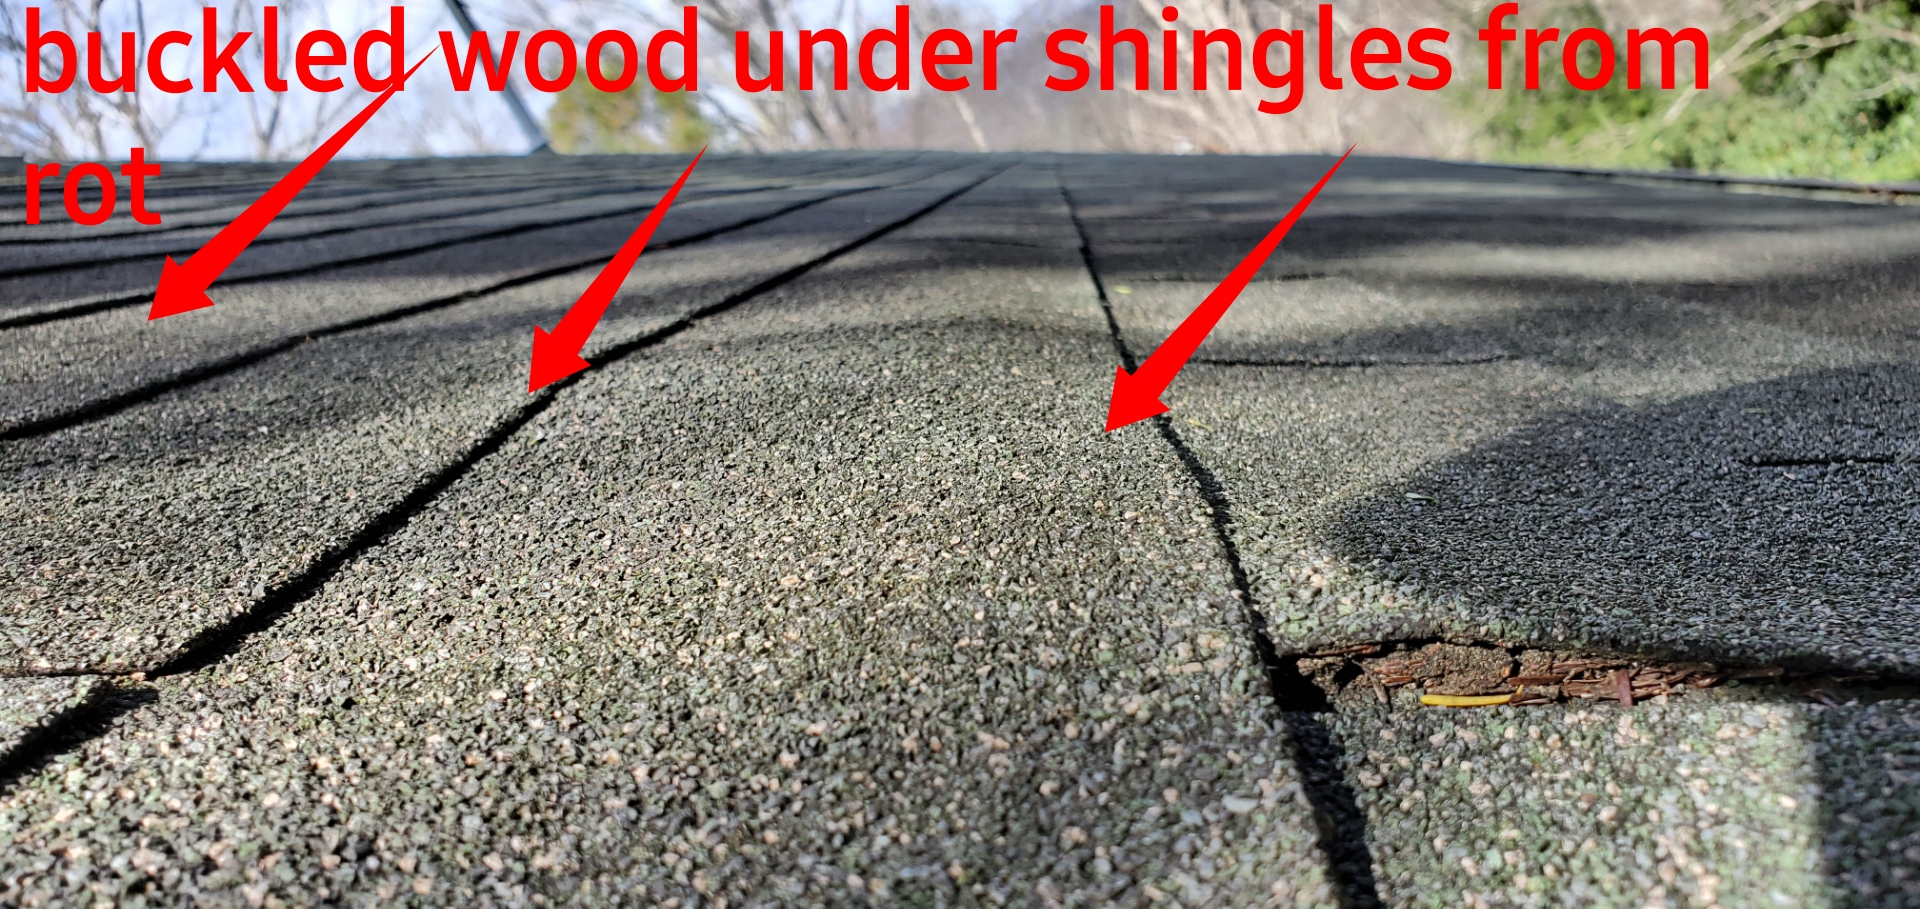 Buckled Wood under shingles